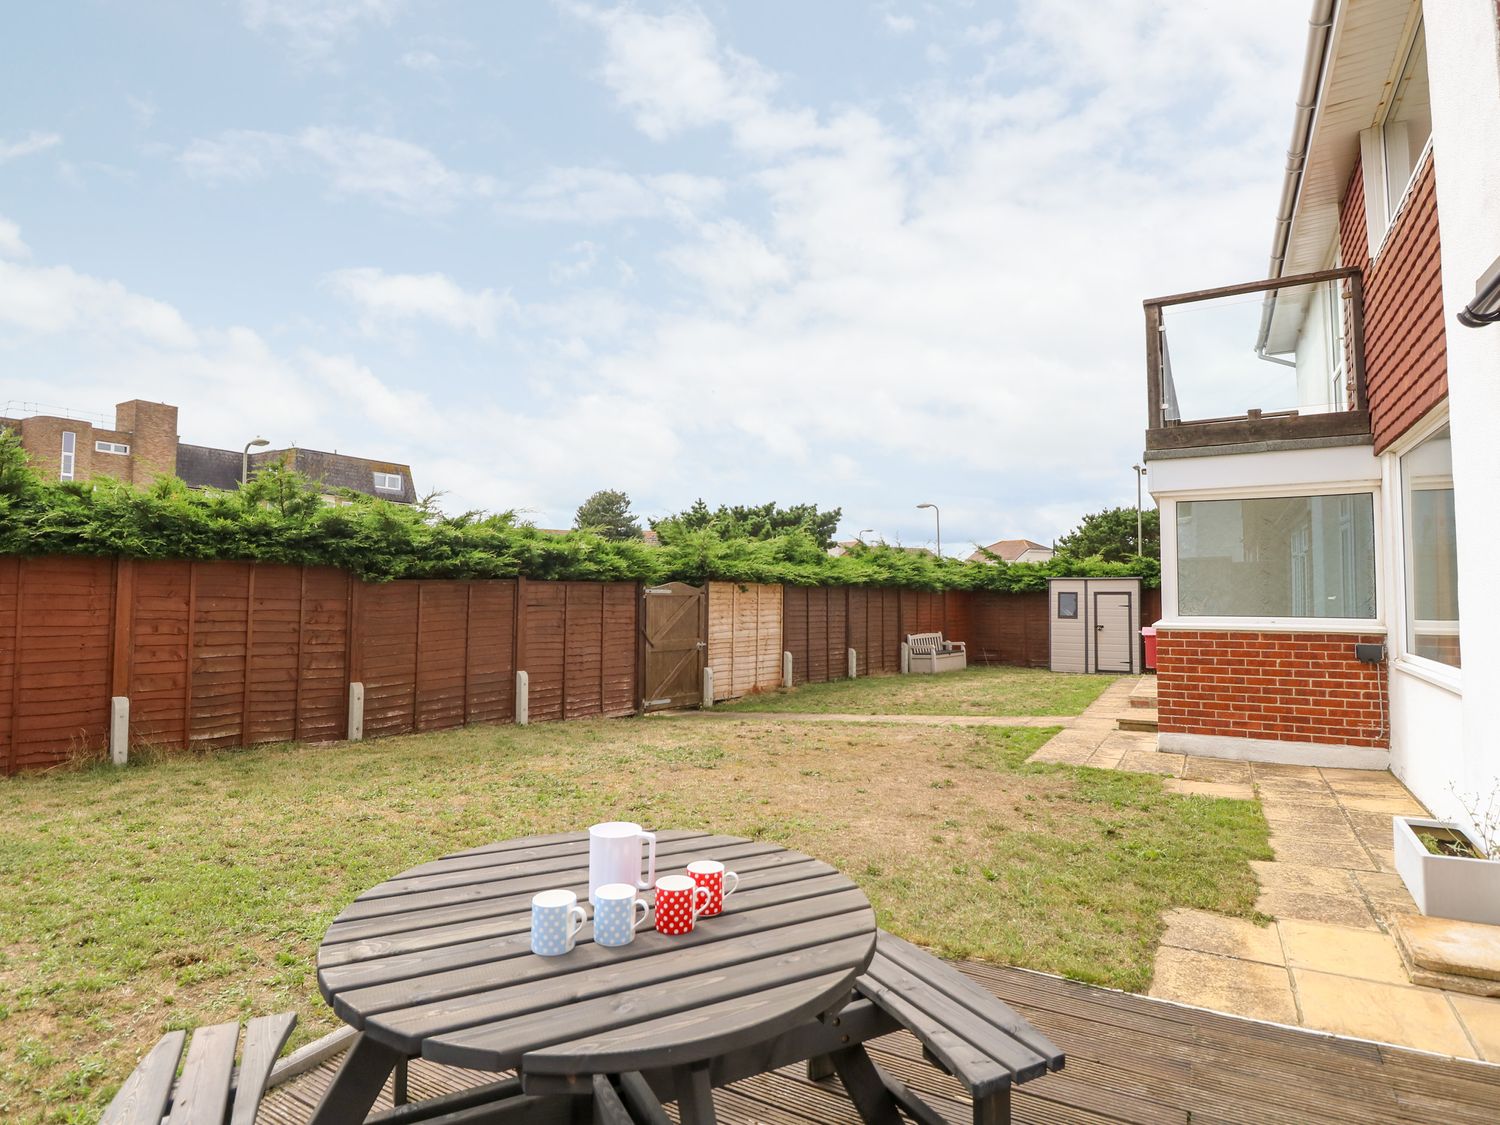 71 Southwood Road, Hayling Island, dog-friendly, close to beach, hot tub, enclosed garden, 4-bedroom